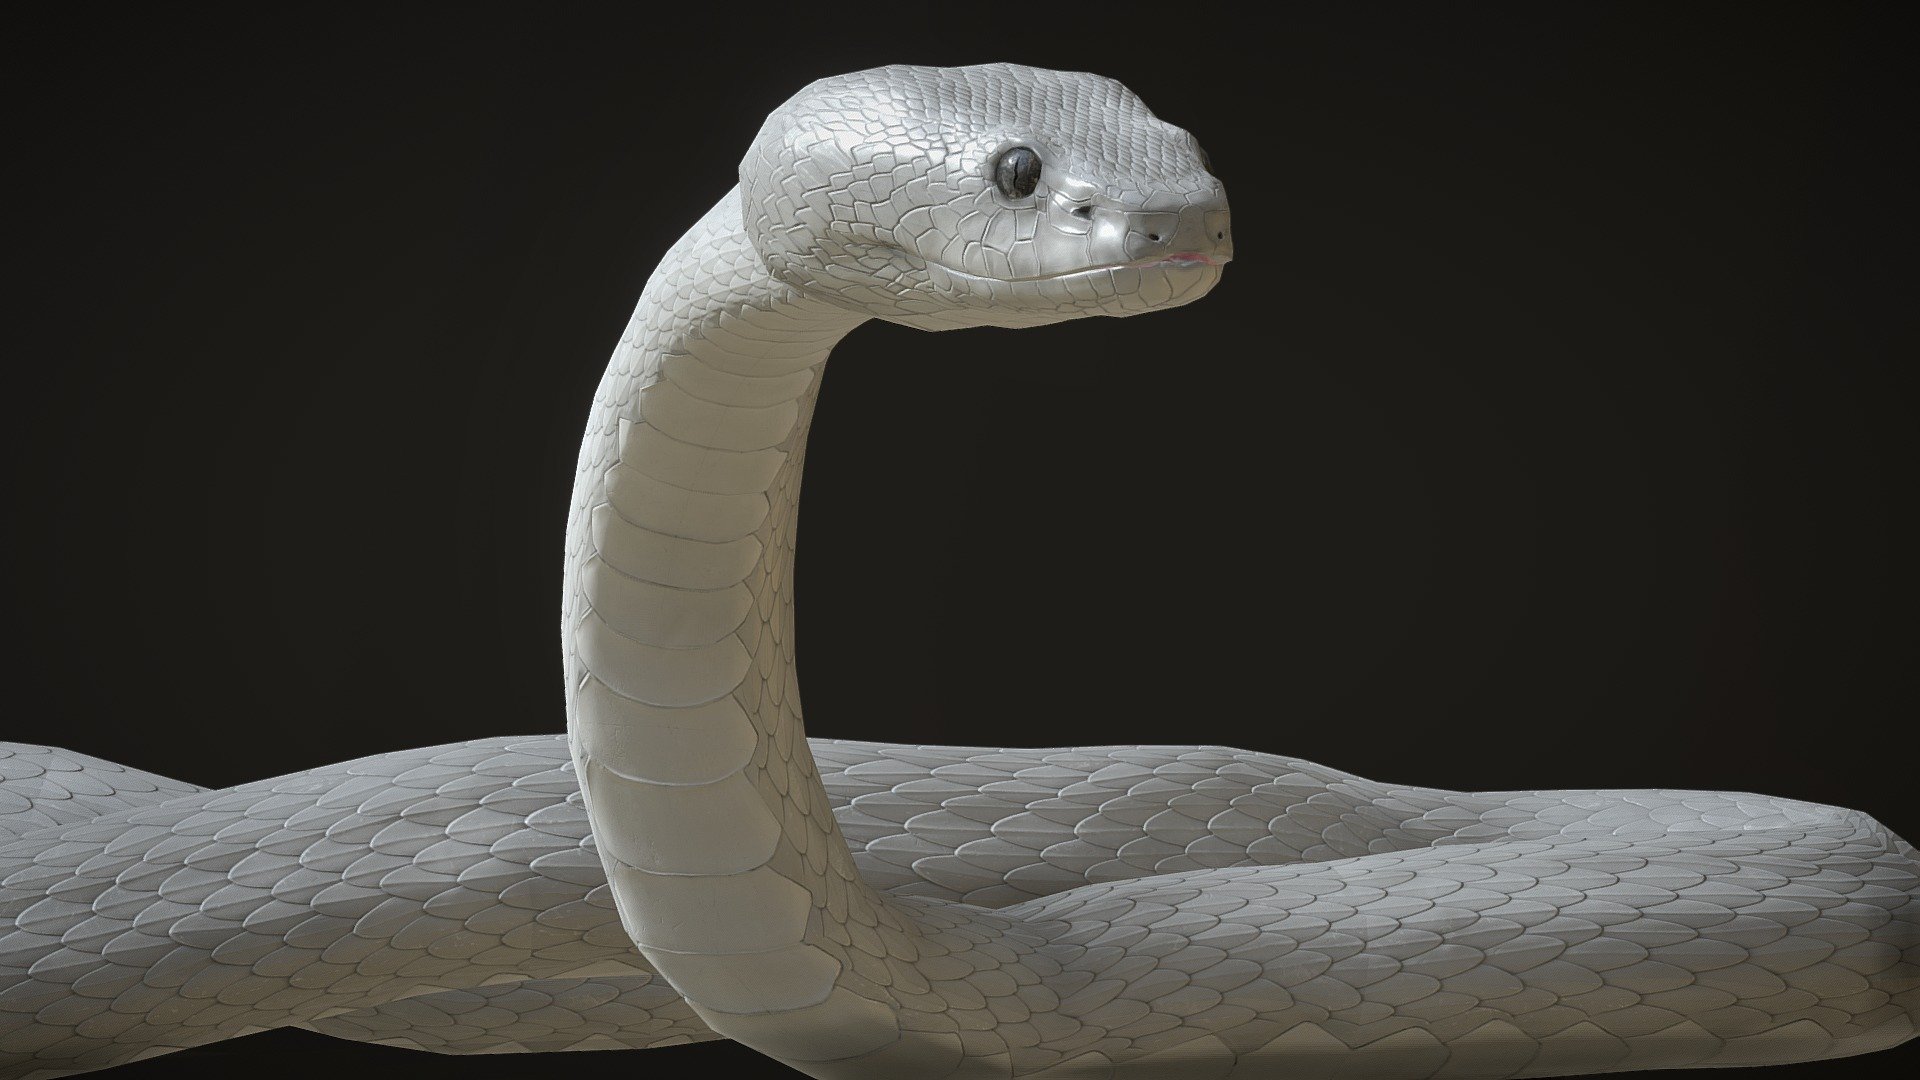 Snake asset with 7 animations for your game project!

Included files:





6 color variations




Unity/Unreal: Channel packed textures with tutorial on material setup in each engine




7 Animations (Idle1, Idle2, Crawl1, Craw2, Attack, Hanging, Dead .fbx)




Original Maya Rig file to make your own animations




Original ZBrush file (.ZTL)





SKETCHFAB BUG: There is a known issue affecting some models with animation during vertex compression. Because of this, the eyes and teeth of the snake are displayed warped when looking at them from the side. This isn't an skinning error. It looks fine in game engines and 3D software.



ArtStation - White Viper with animations - Buy Royalty Free 3D model by Bugawuga 3d model